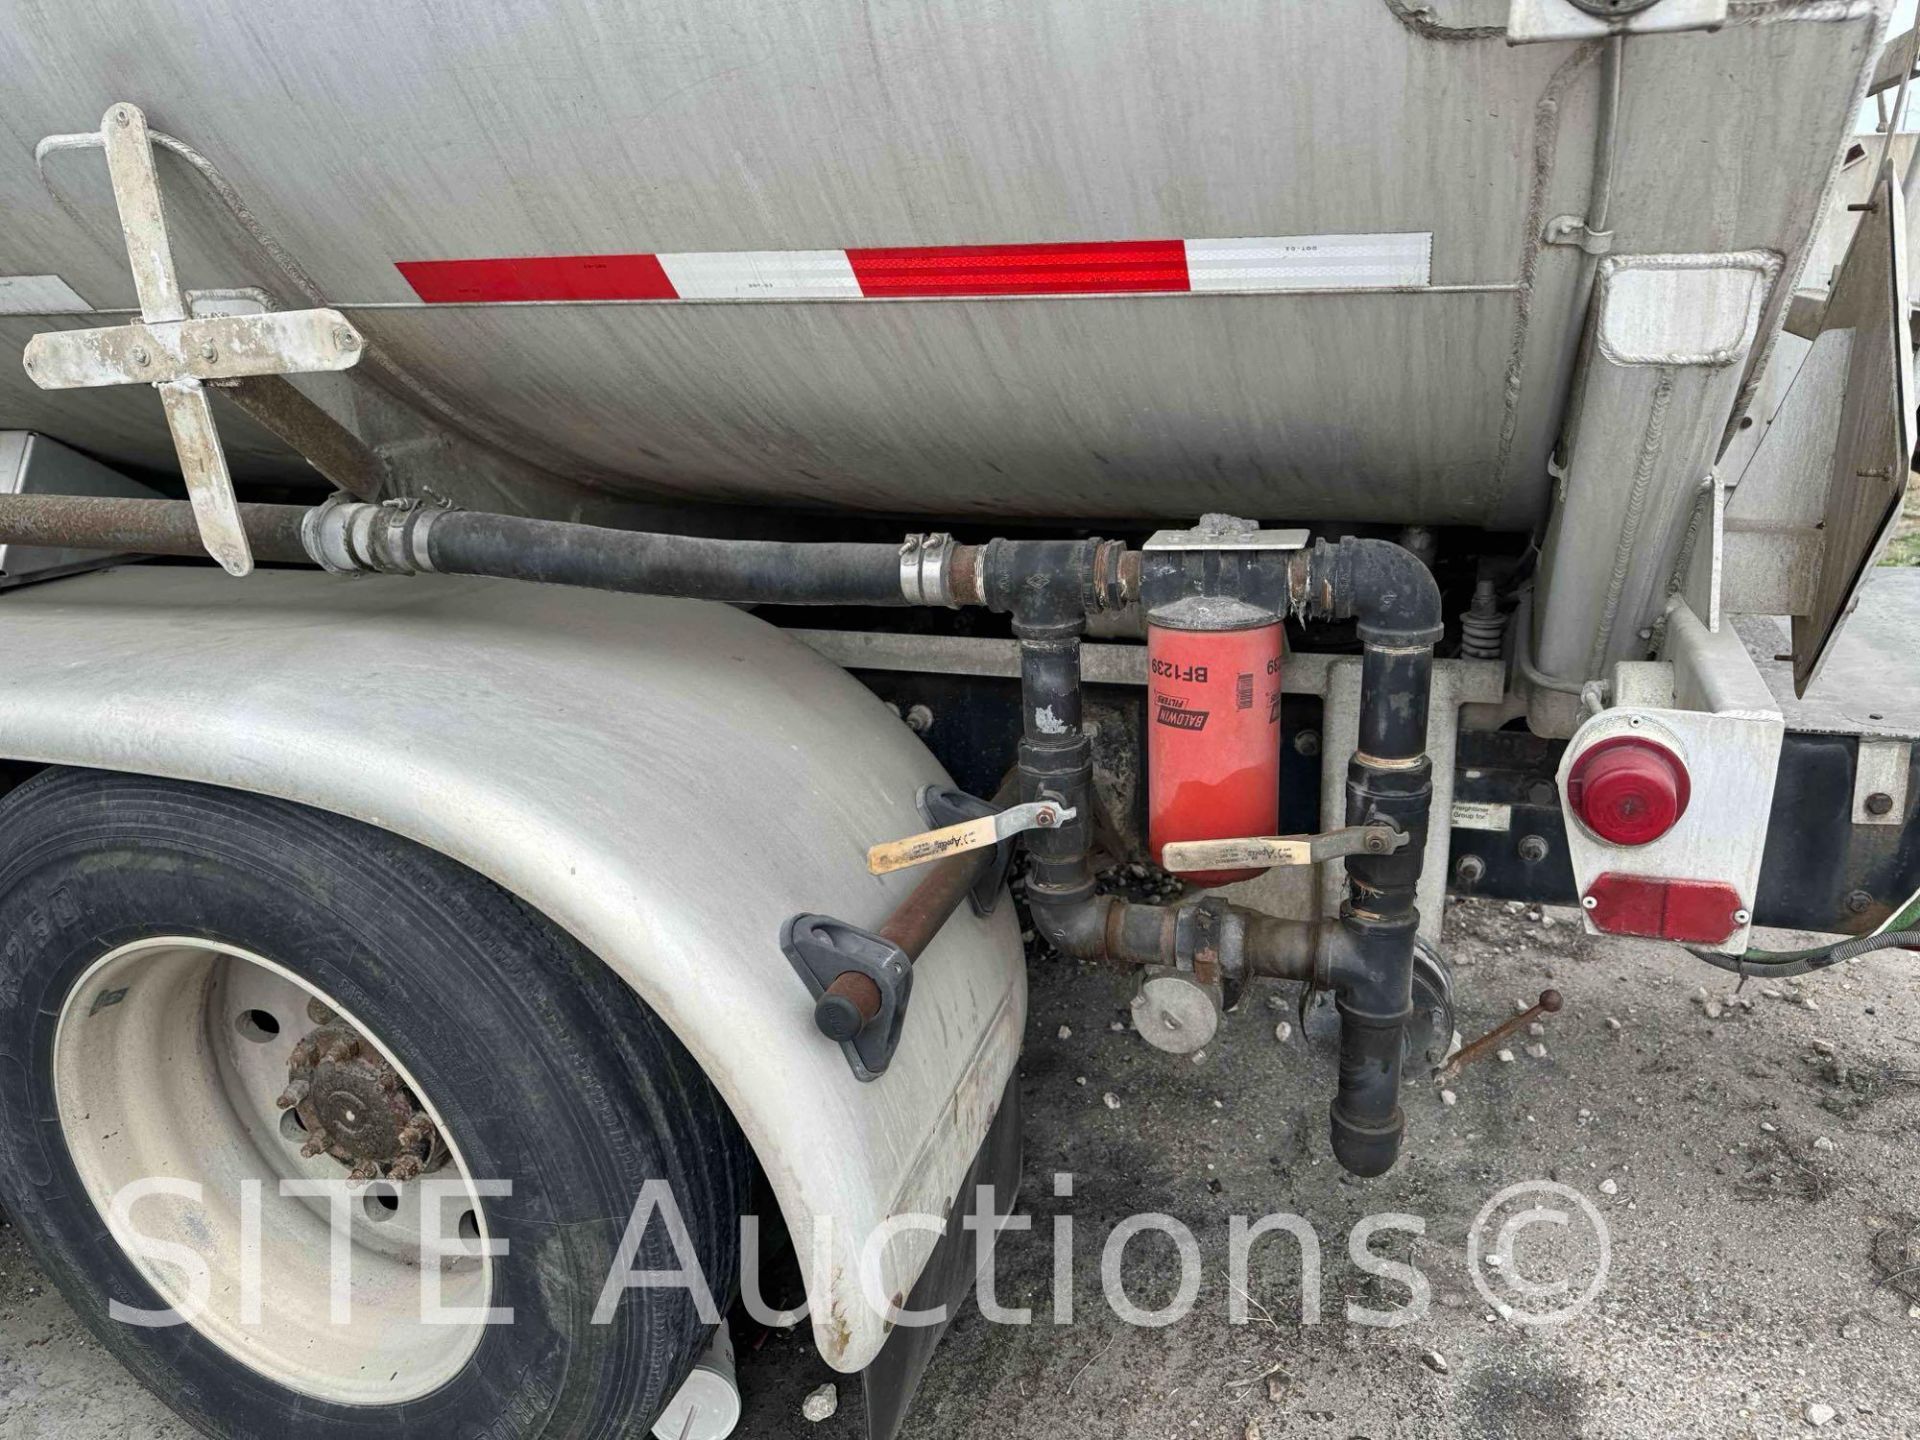 2004 Freightliner Columbia T/A Fuel Truck - Image 53 of 85